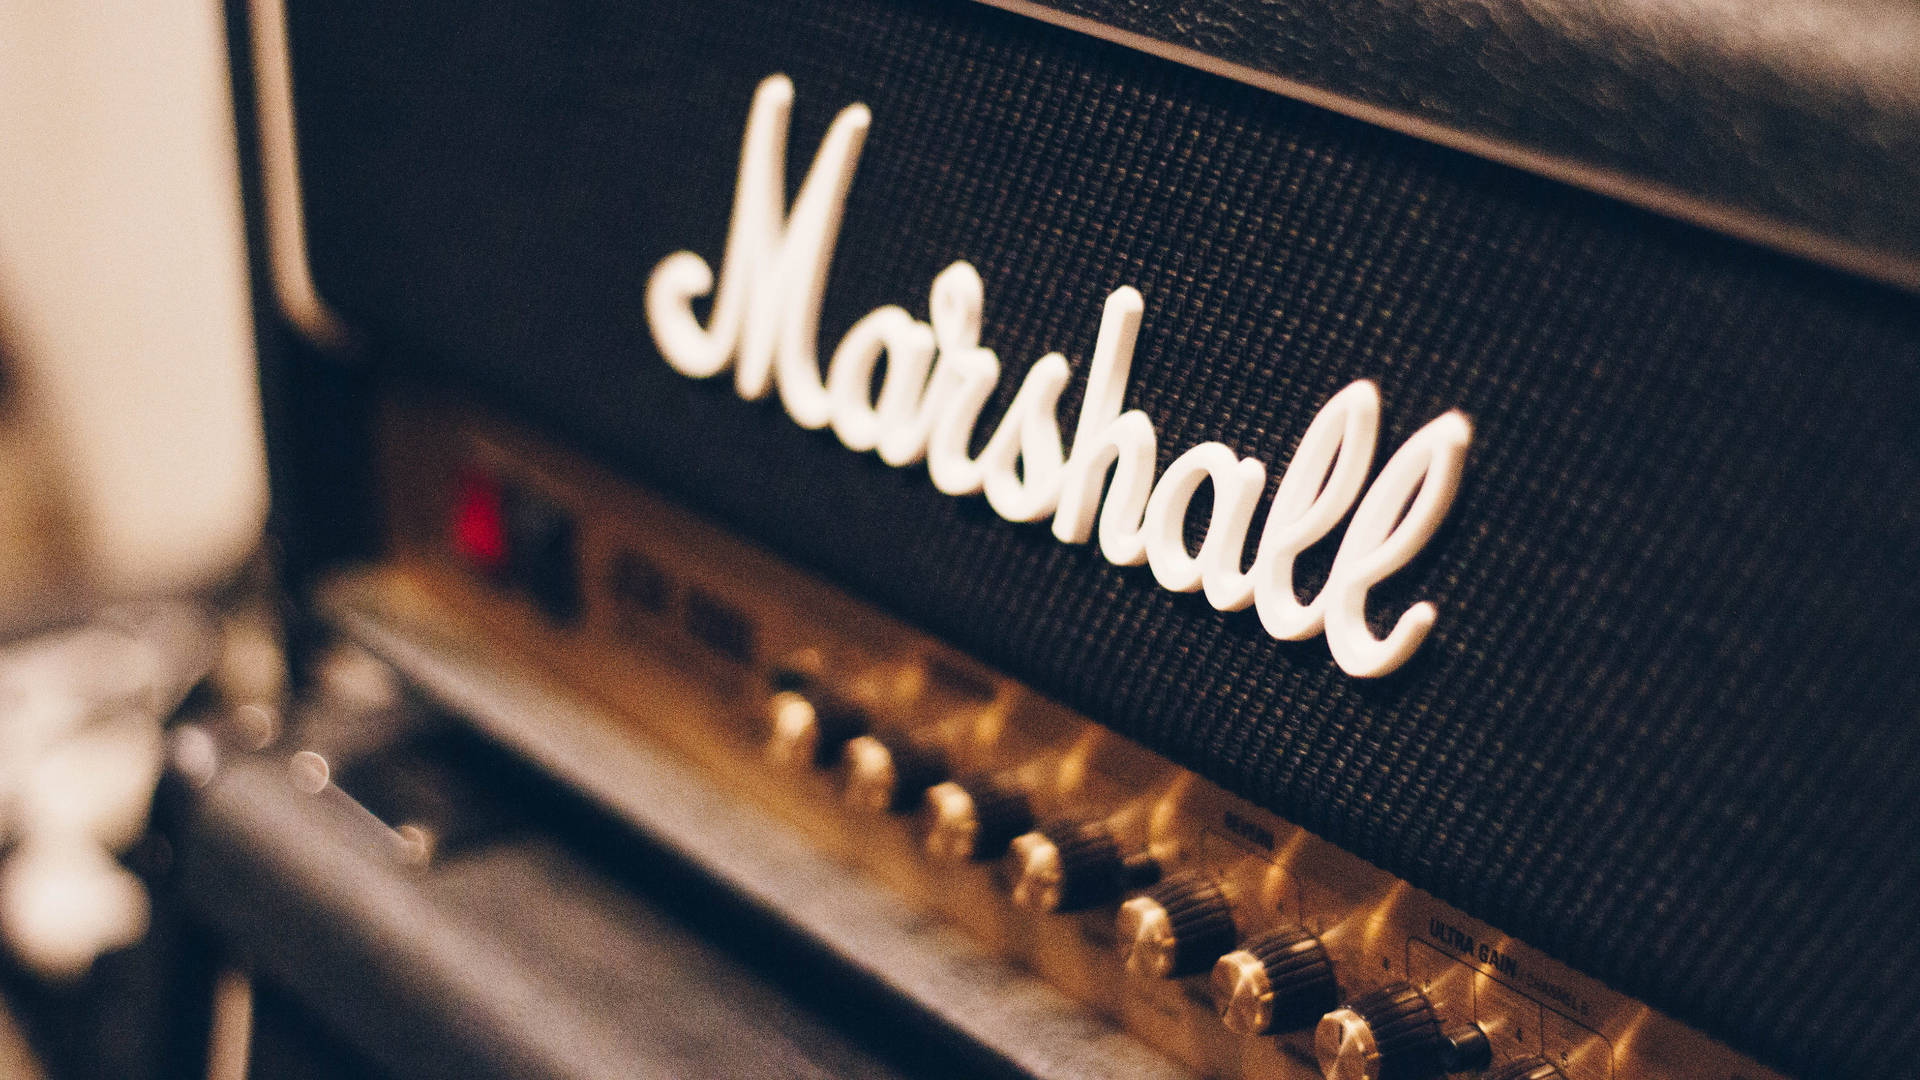 Focus Marshall Amplifier Background